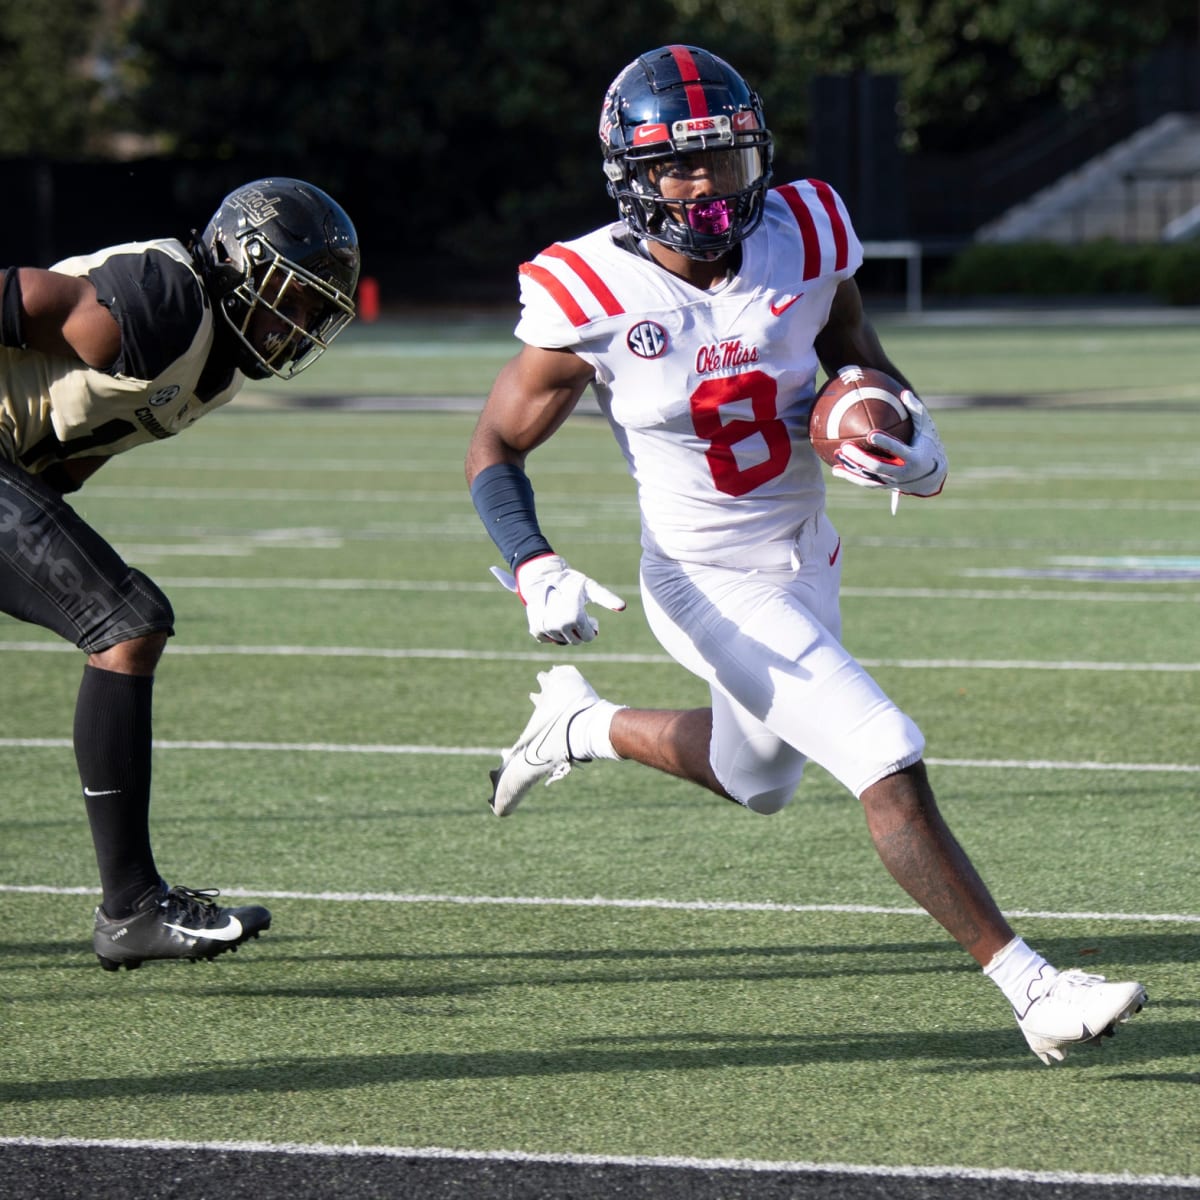 2021 Nfl Draft Prospect Profile Wr Elijah Moore Ole Miss Sports Illustrated New York Giants News Analysis And More